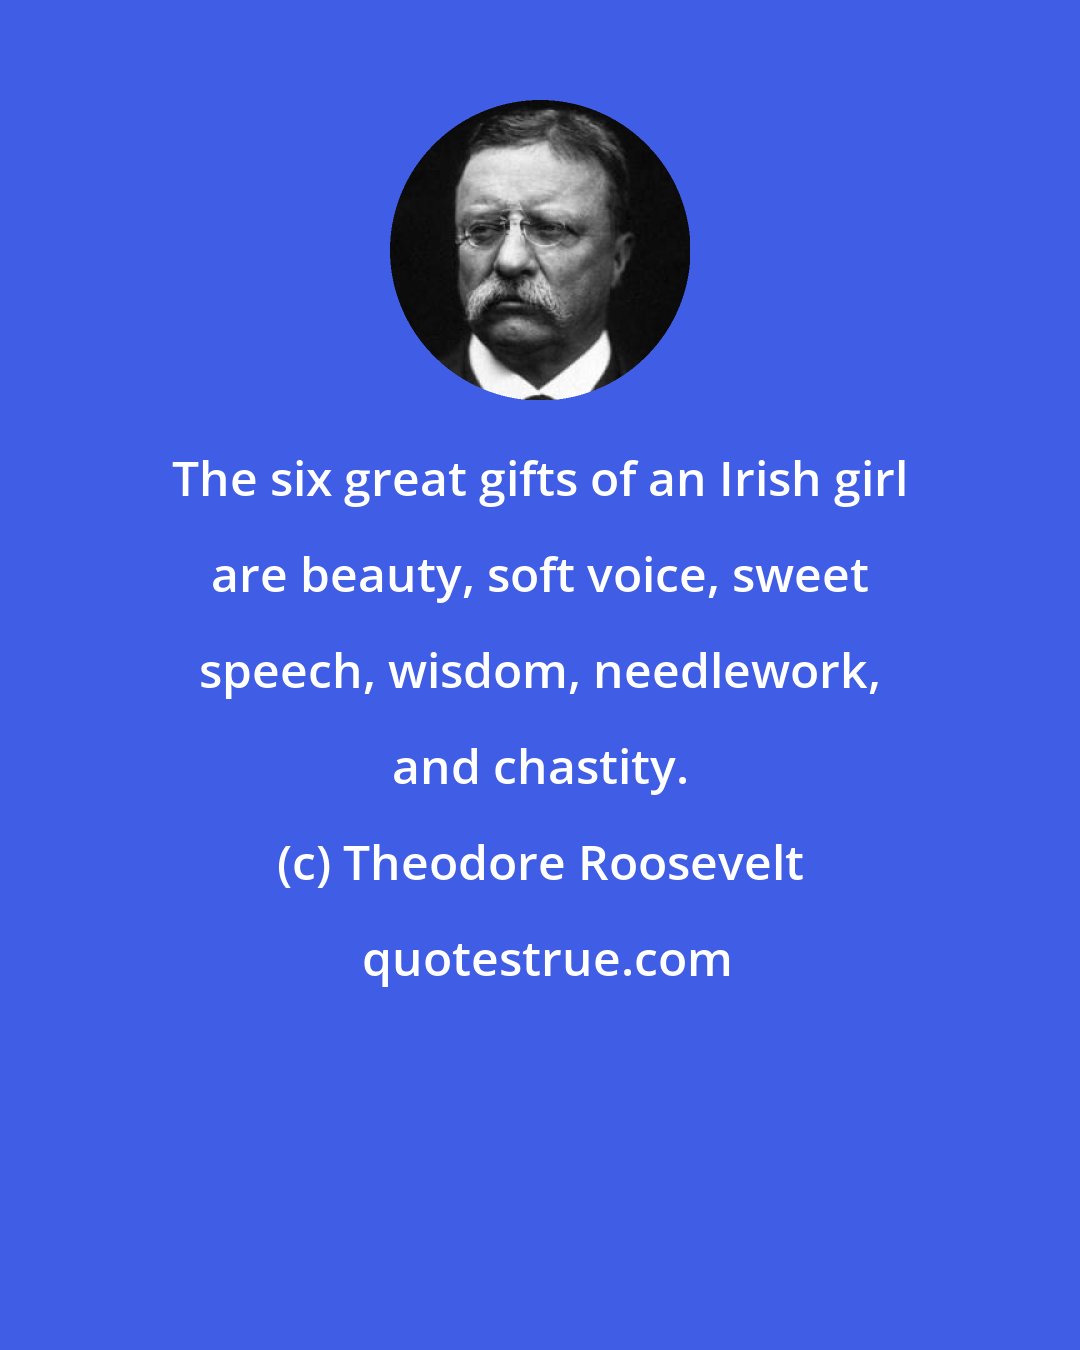 Theodore Roosevelt: The six great gifts of an Irish girl are beauty, soft voice, sweet speech, wisdom, needlework, and chastity.